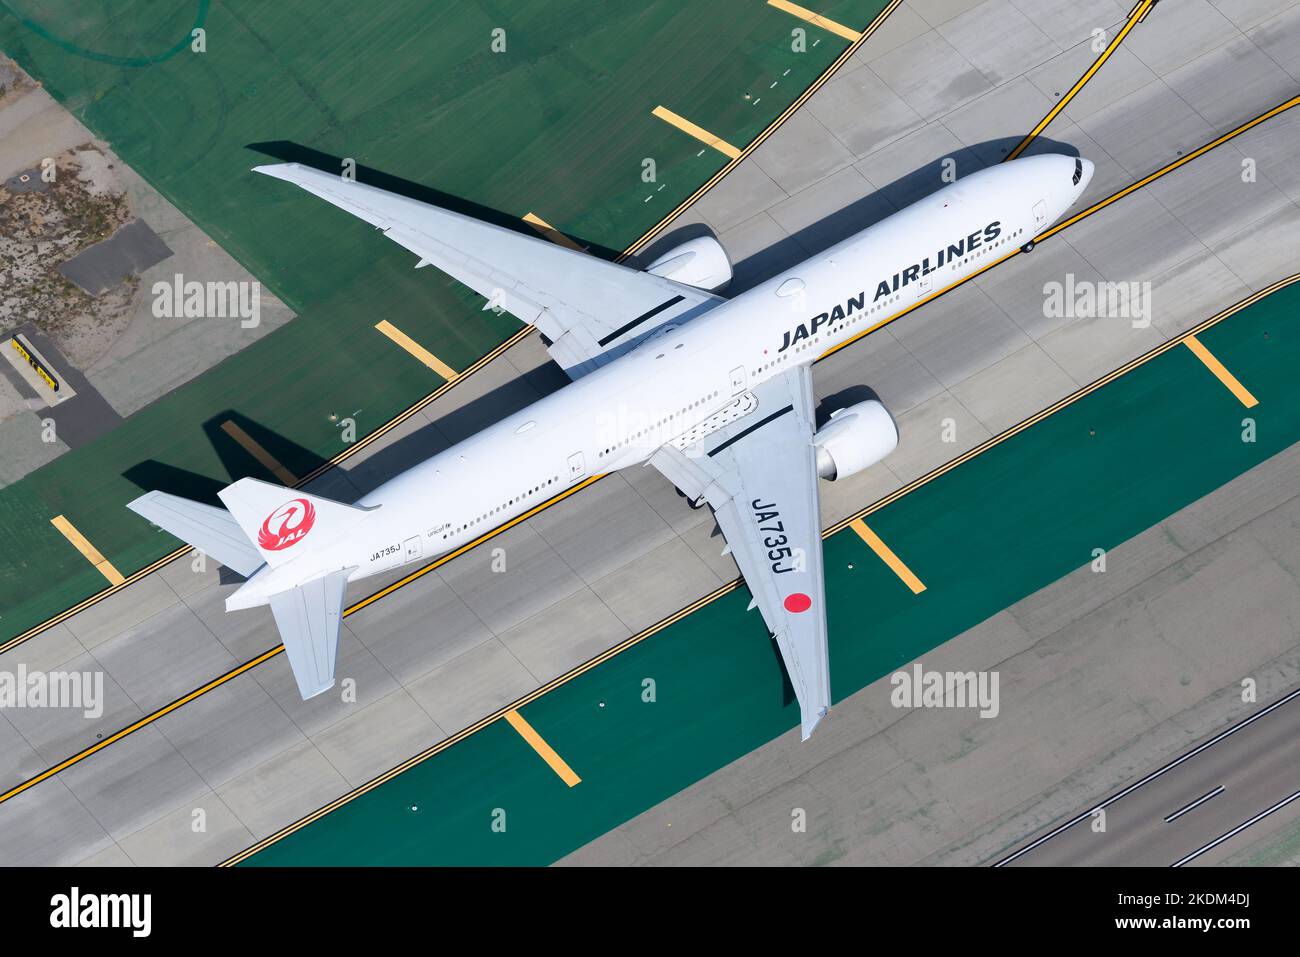 Japan Airlines Boeing 777 airplane taxiing Aircraft 77W of Japan Airlines / JAL Airlines. Plane JA735J of 777-300ER model. Stock Photo